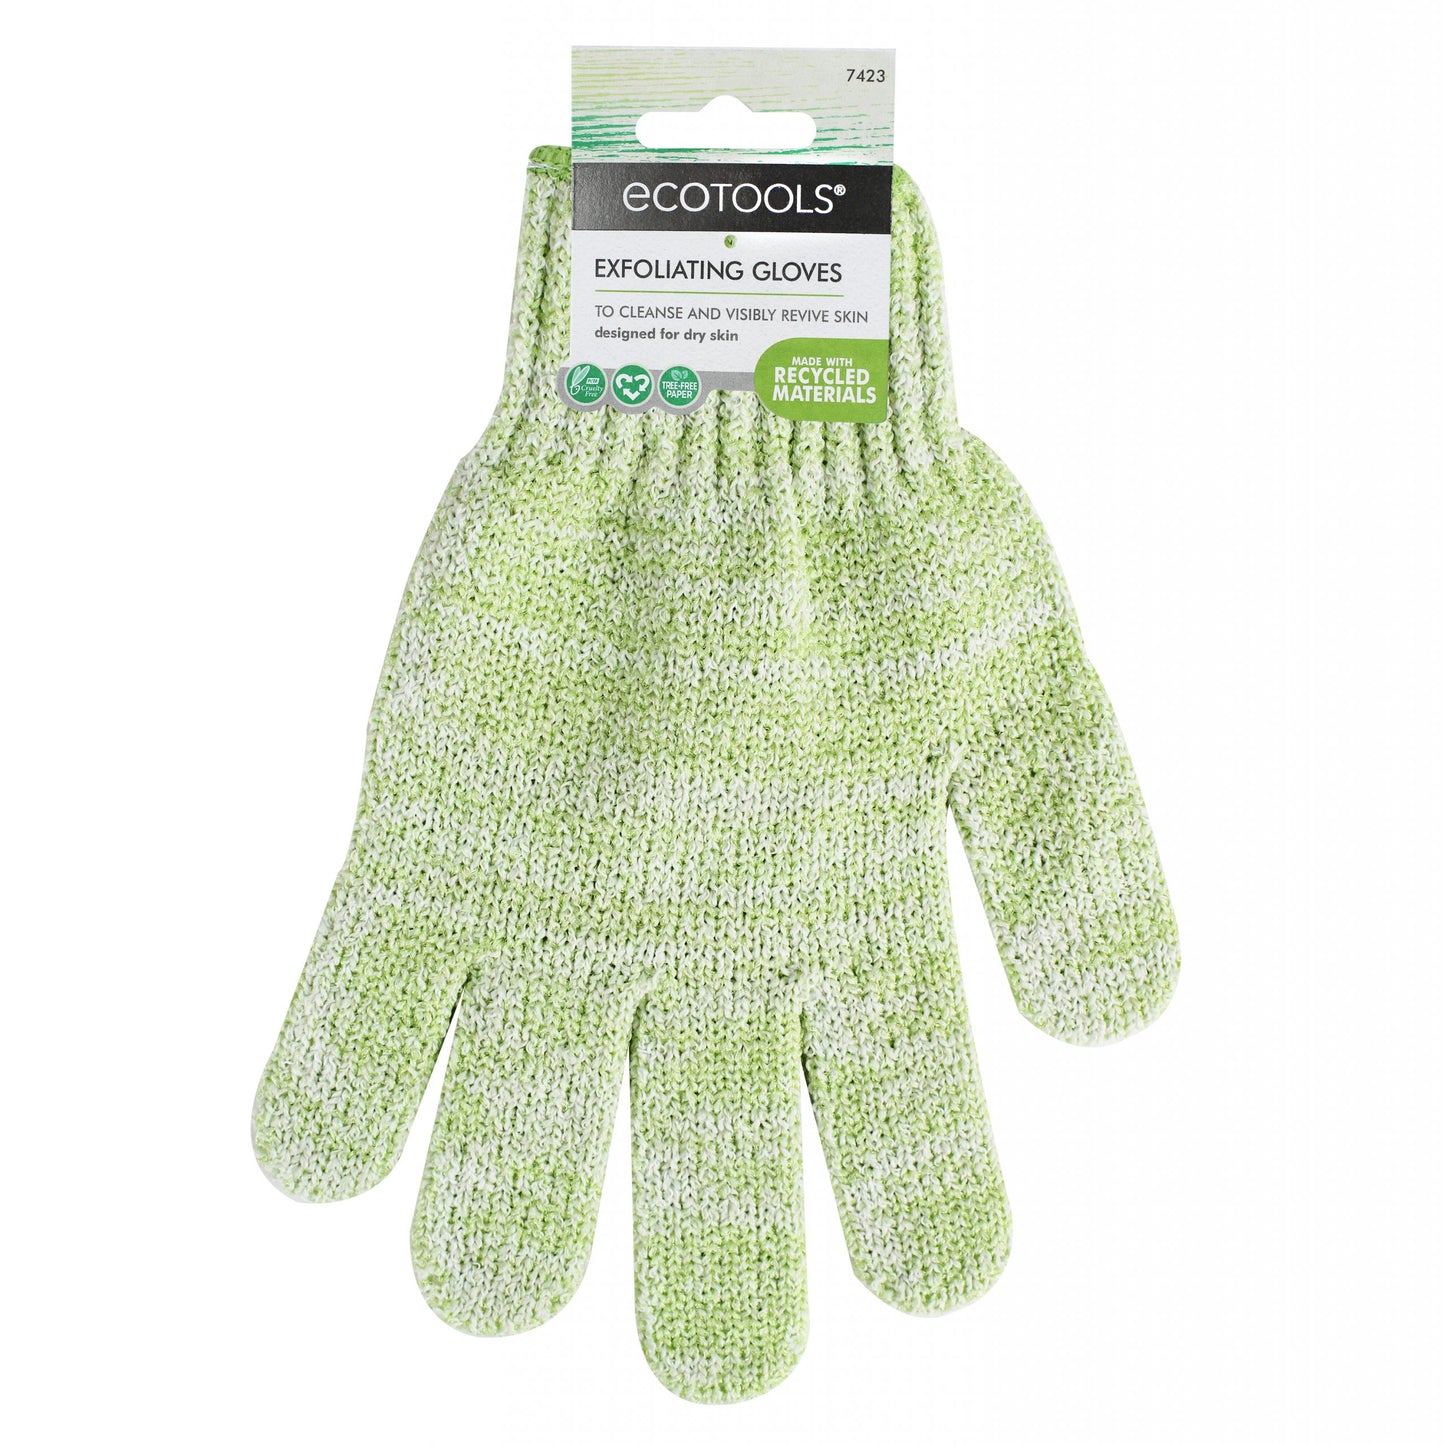 Eco Tools Exfoliating Bath & Shower Gloves {1 Pair}, Best For Dry Skin